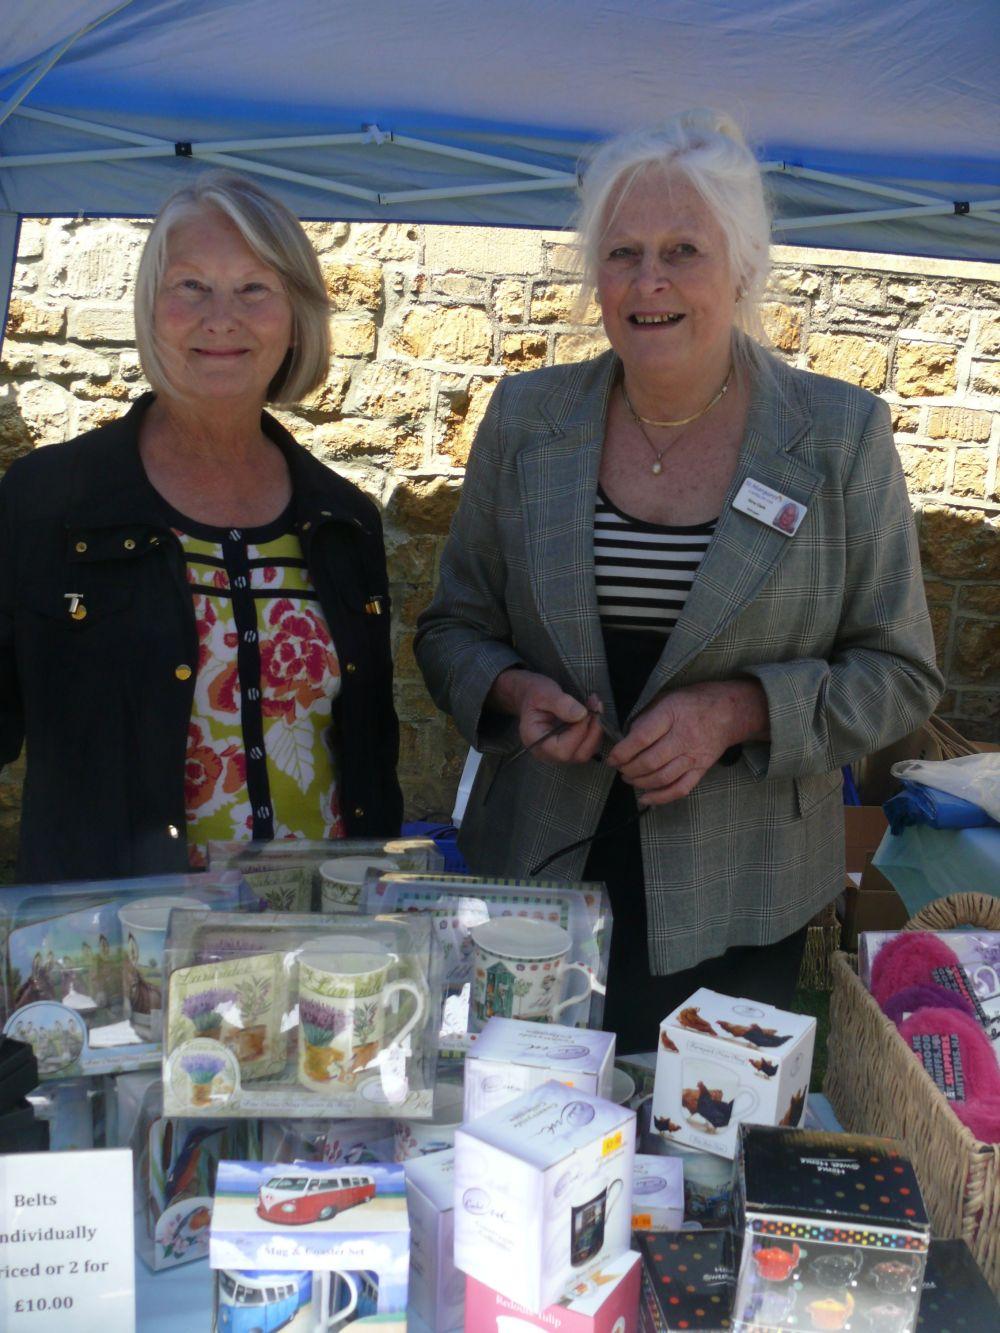 Julia Woodwards and Gina Clark on a fundraising stall for St Margaret's Somerset Hospice at charity drive on the path into Greenfylde First School.